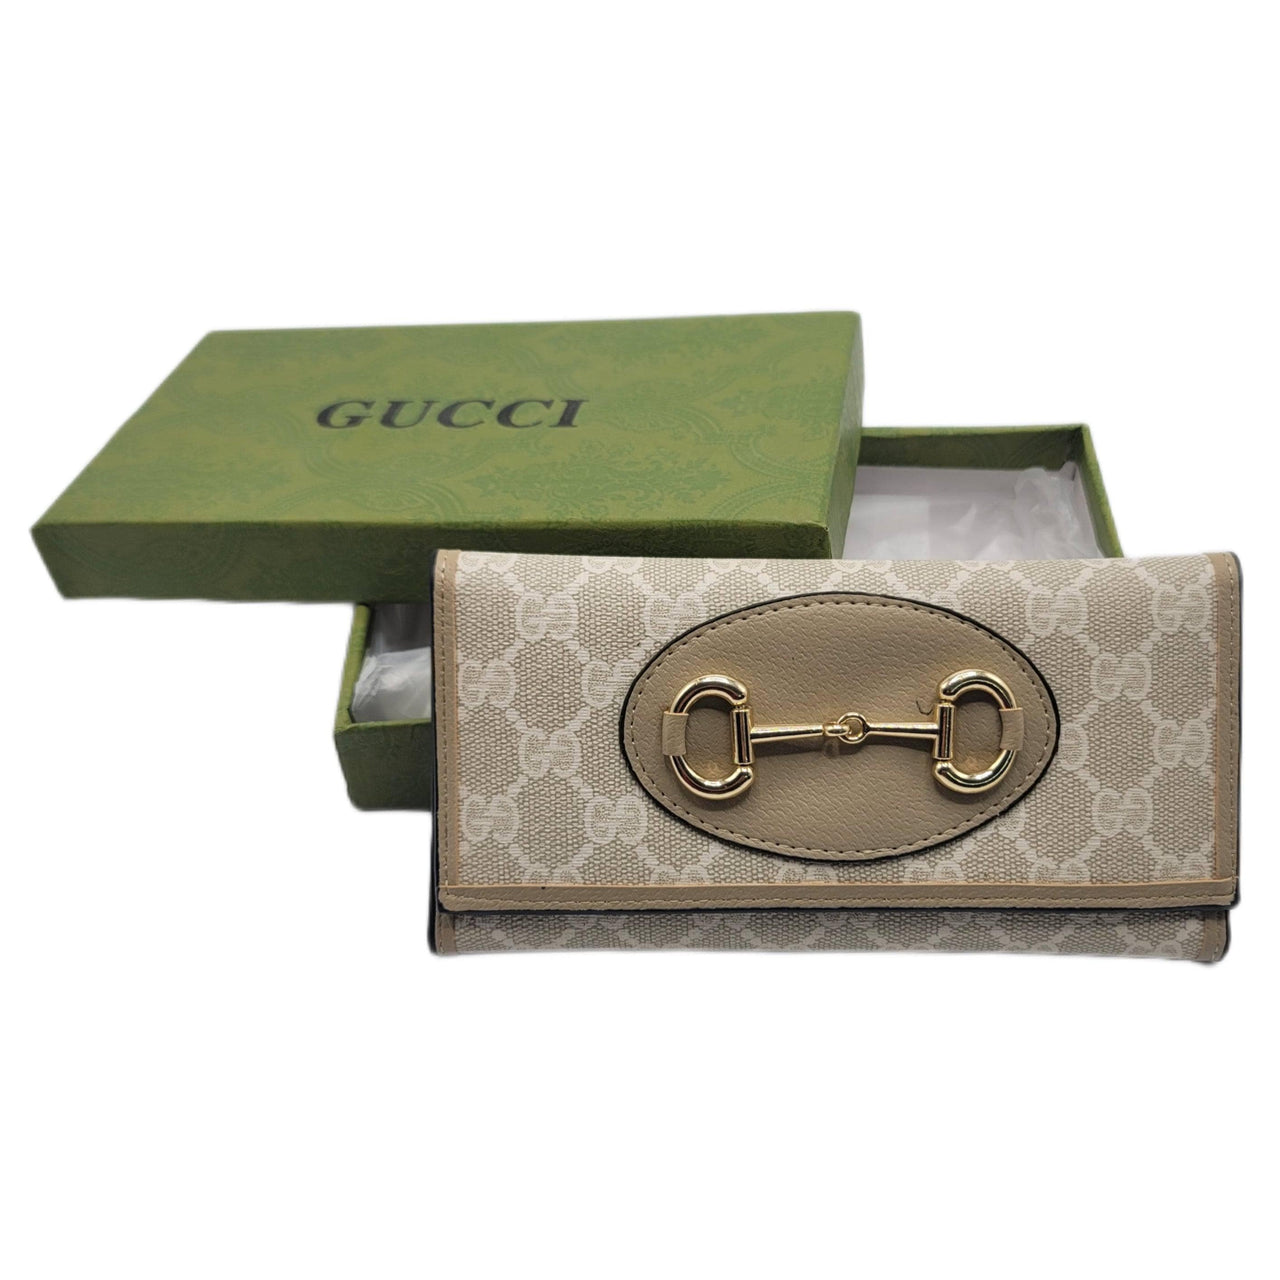 The Bag Couture Luggage & Bags Gucci 3 Fold Wallet Classic Cuffs Beige